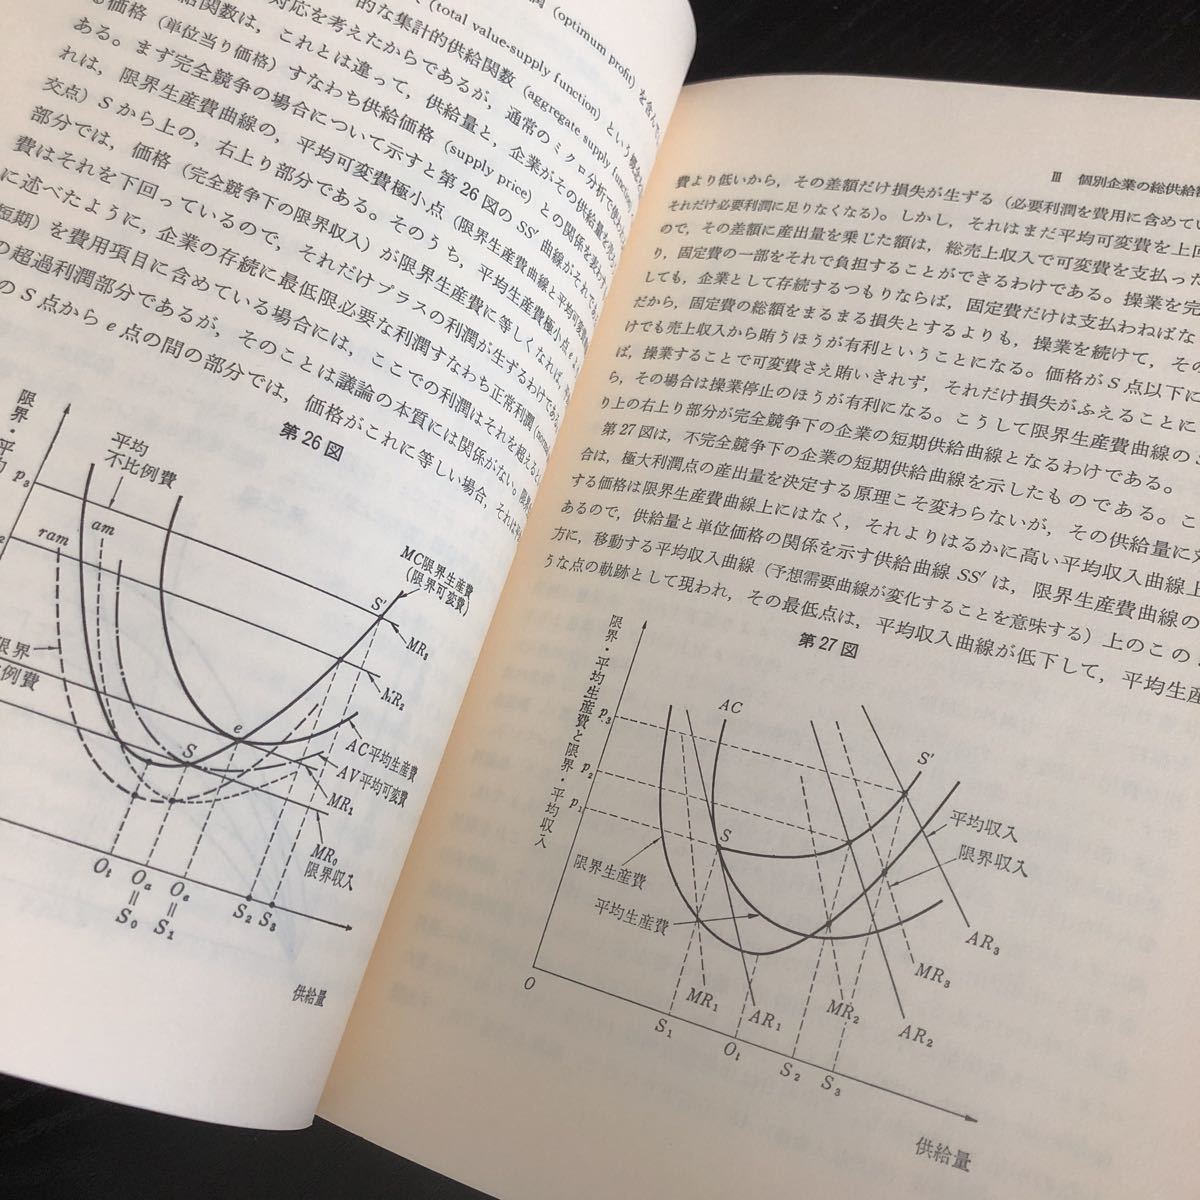 ma91 Keynes general theory. base Showa era 52 year 9 month 15 day the first version no. 1. issue Kawaguchi . have .. books history country . place profit country . production investment money materials economics 